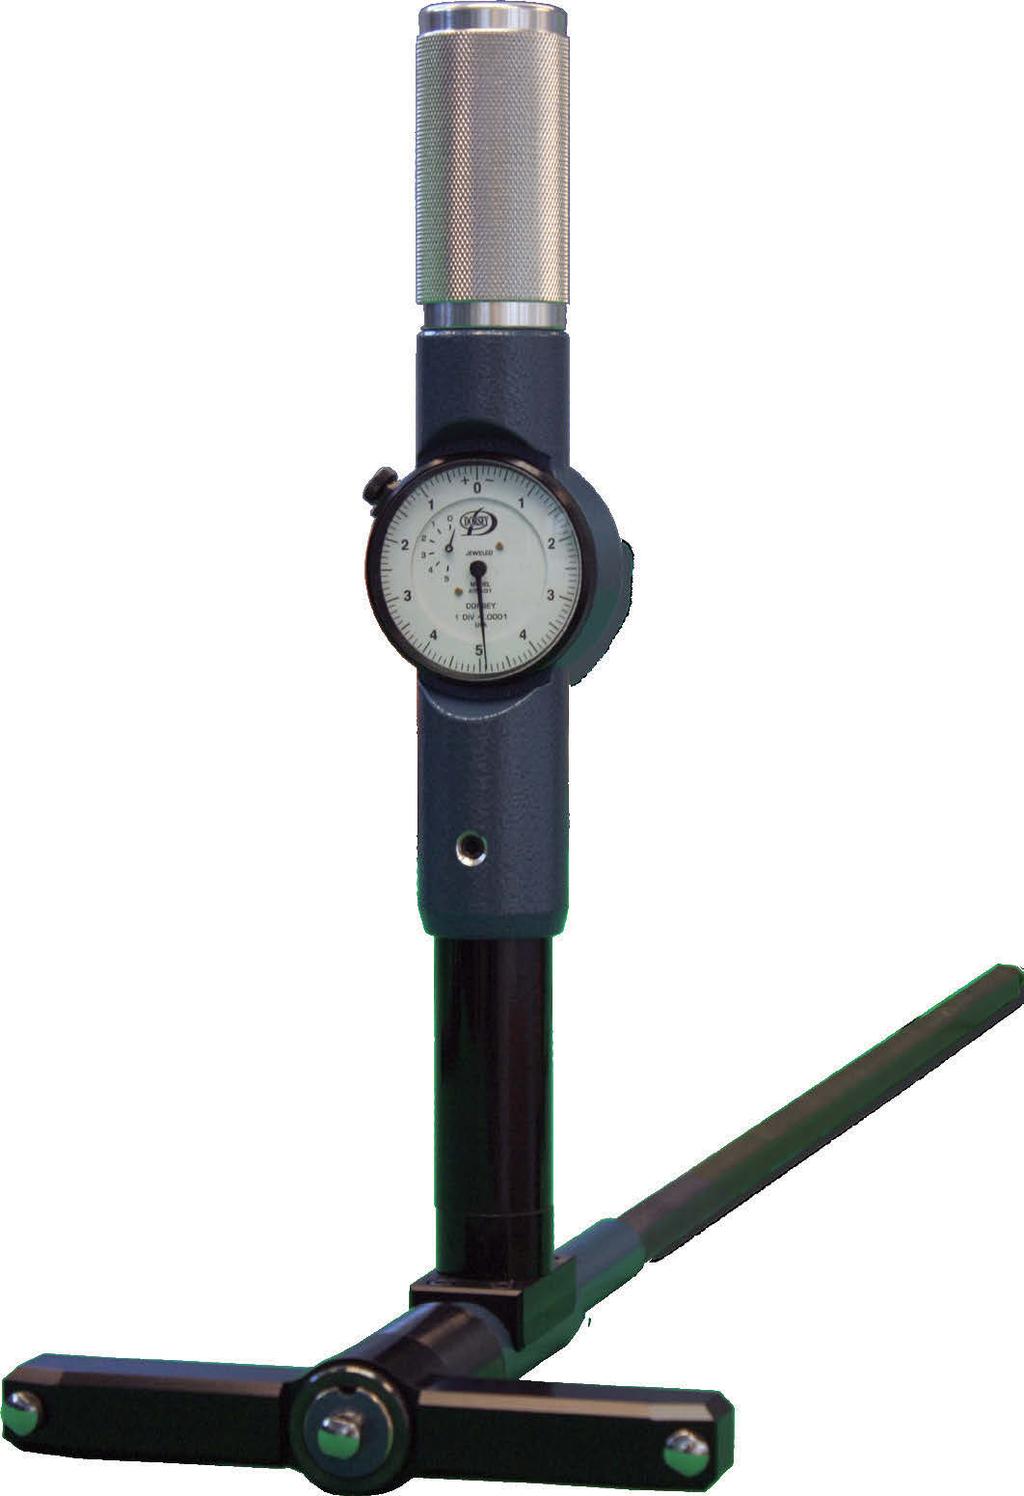 Dorsey Standard Large Bore Gages A time proven design expanded to measure large bore sizes Style 1- Both models utilize the same robust 1